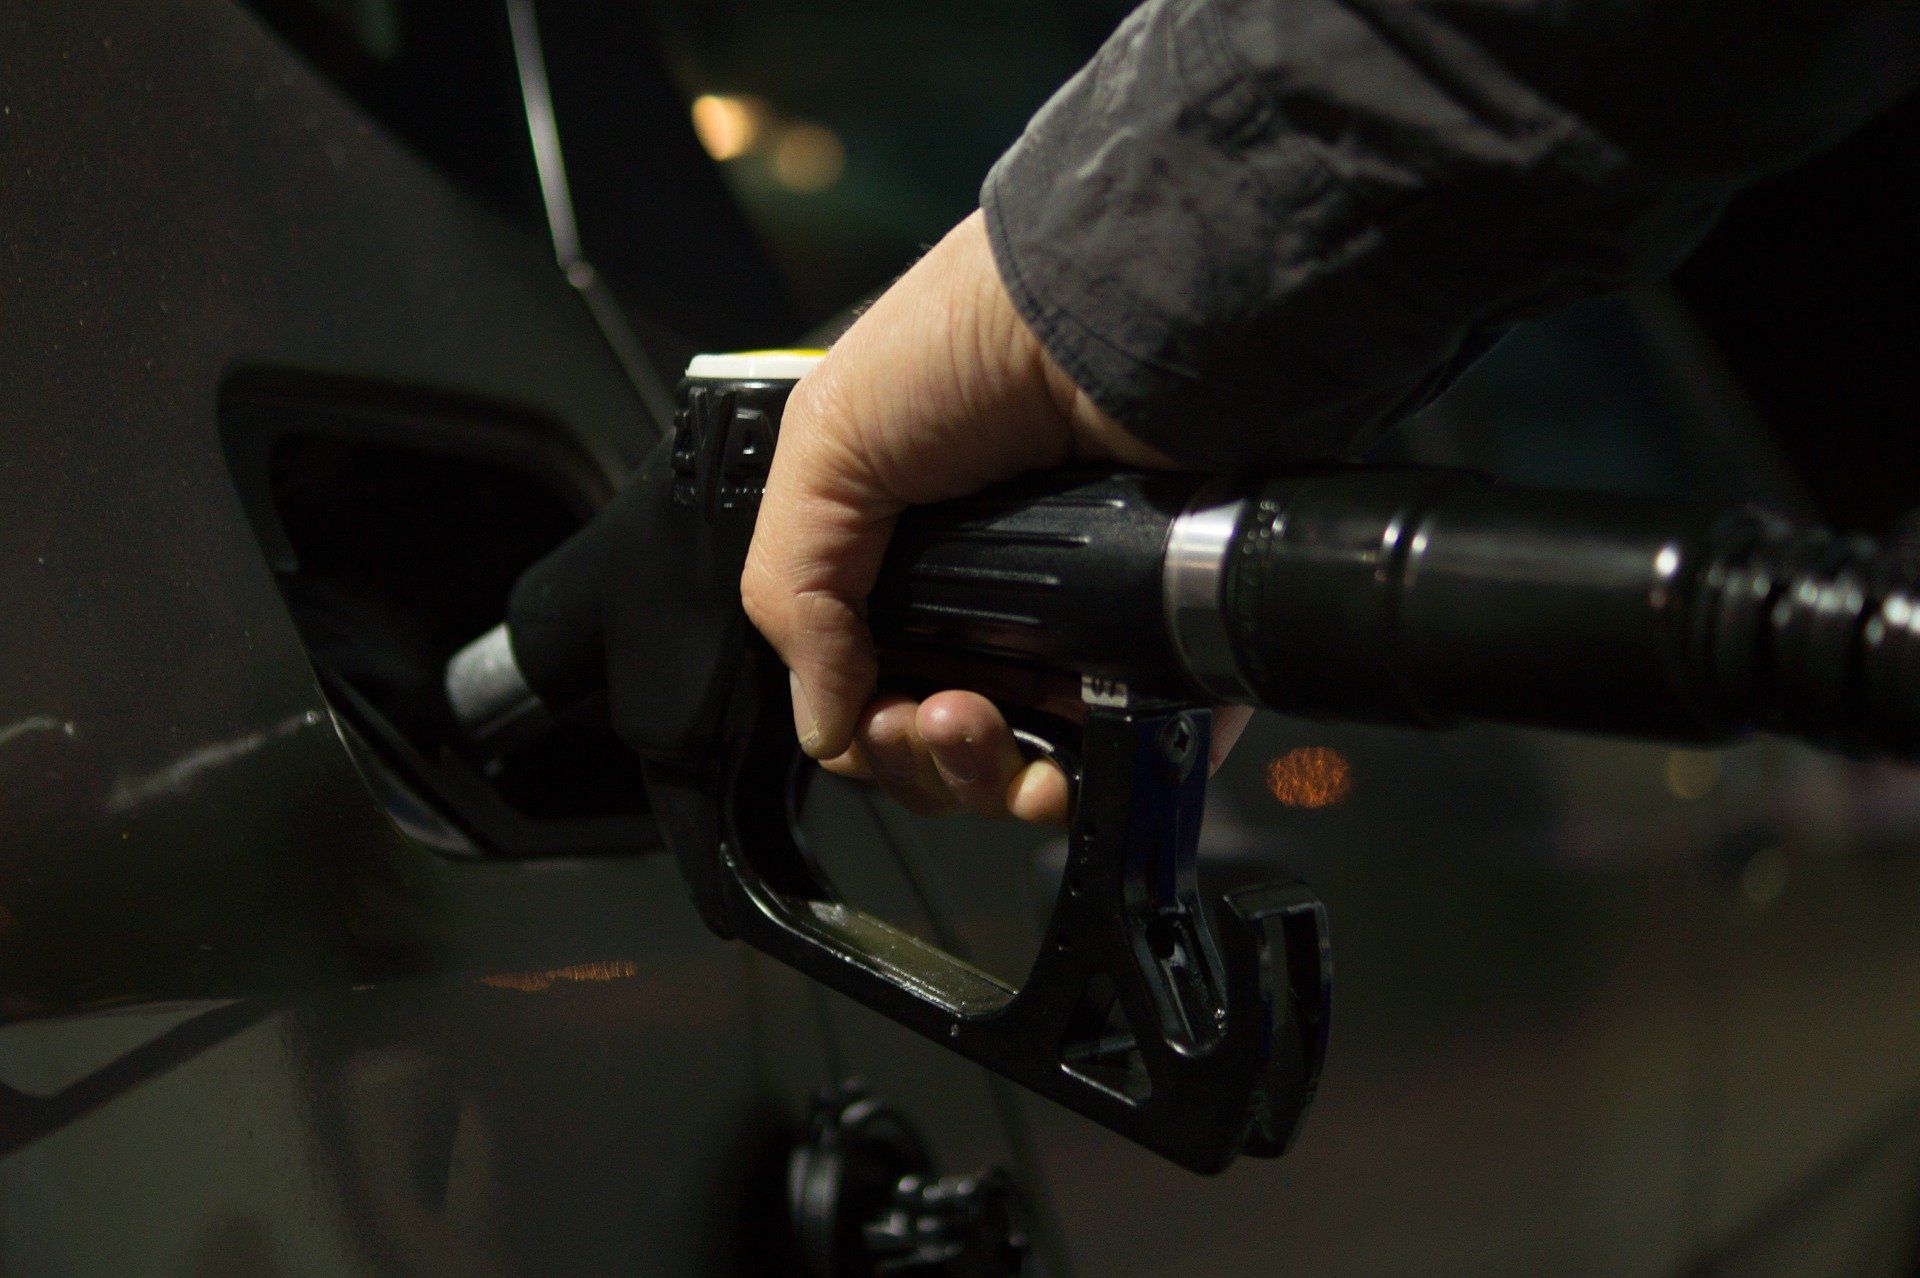 Fuel prices: Petrol and Diesel rates remained unchanged on April 1, 2022